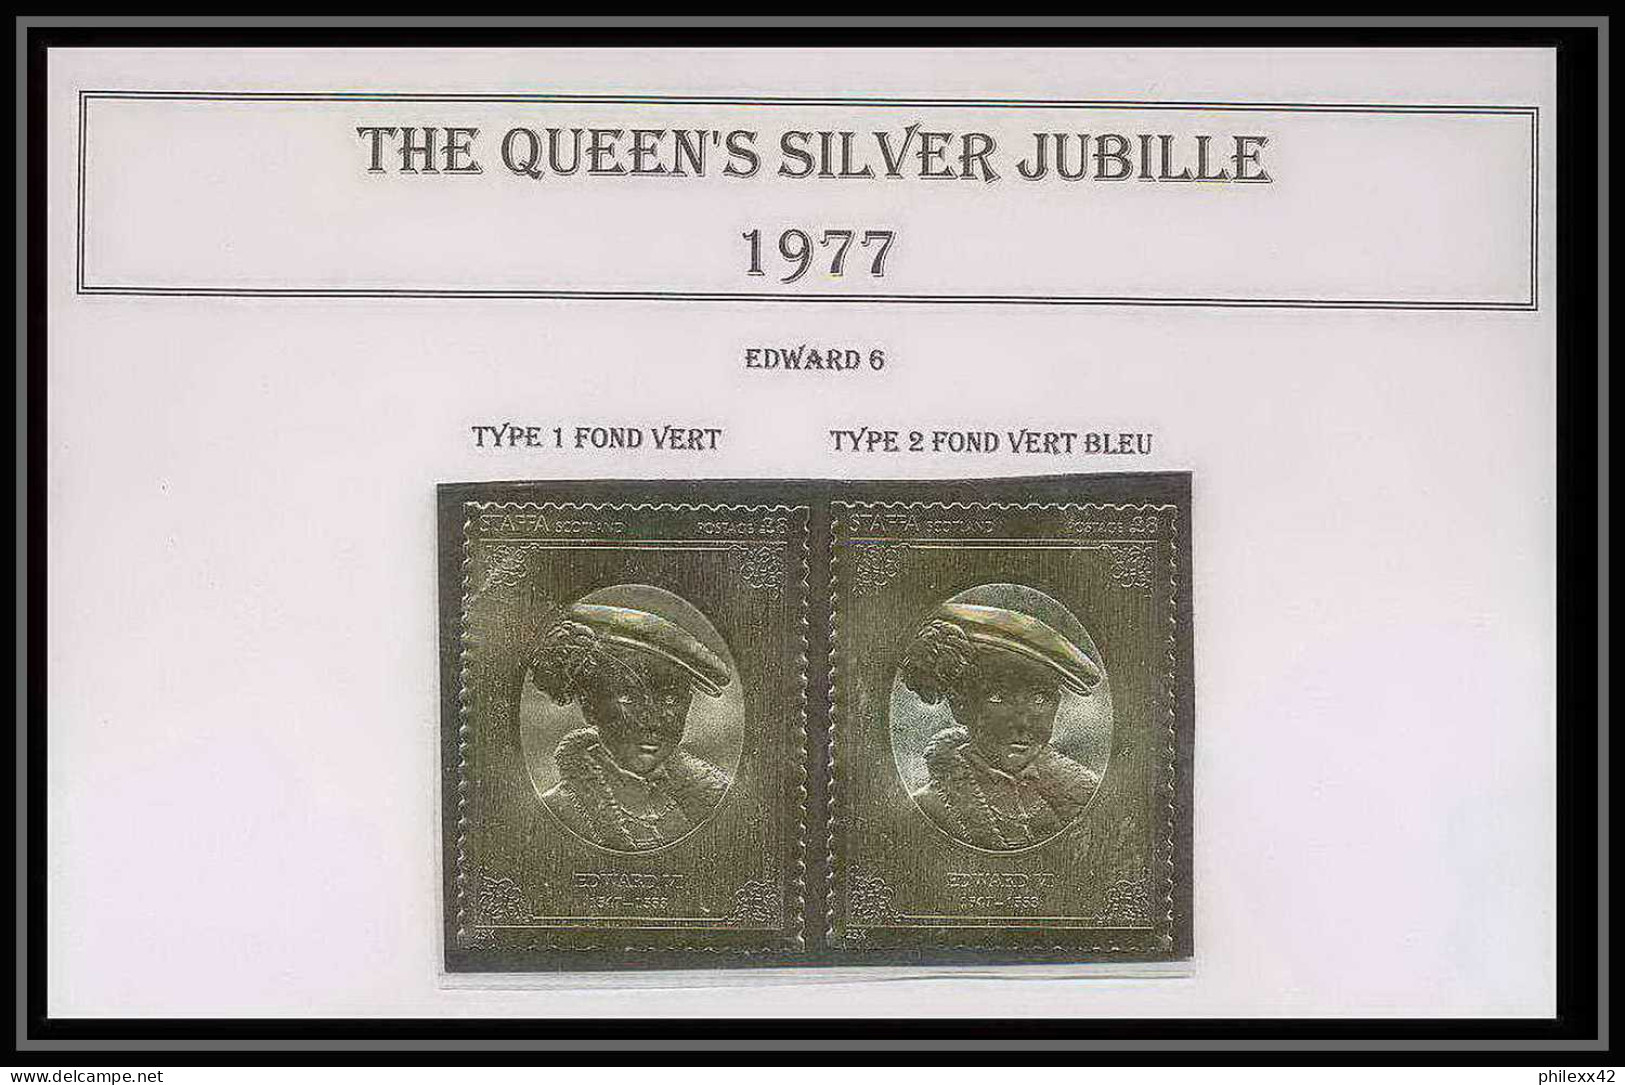 460 Staffa Scotland The Queen's Silver Jubilee 1977 OR Gold Stamps Monarchy United Kingdom Edward 6 Type 1&2 Neuf** Mnh - Ortsausgaben